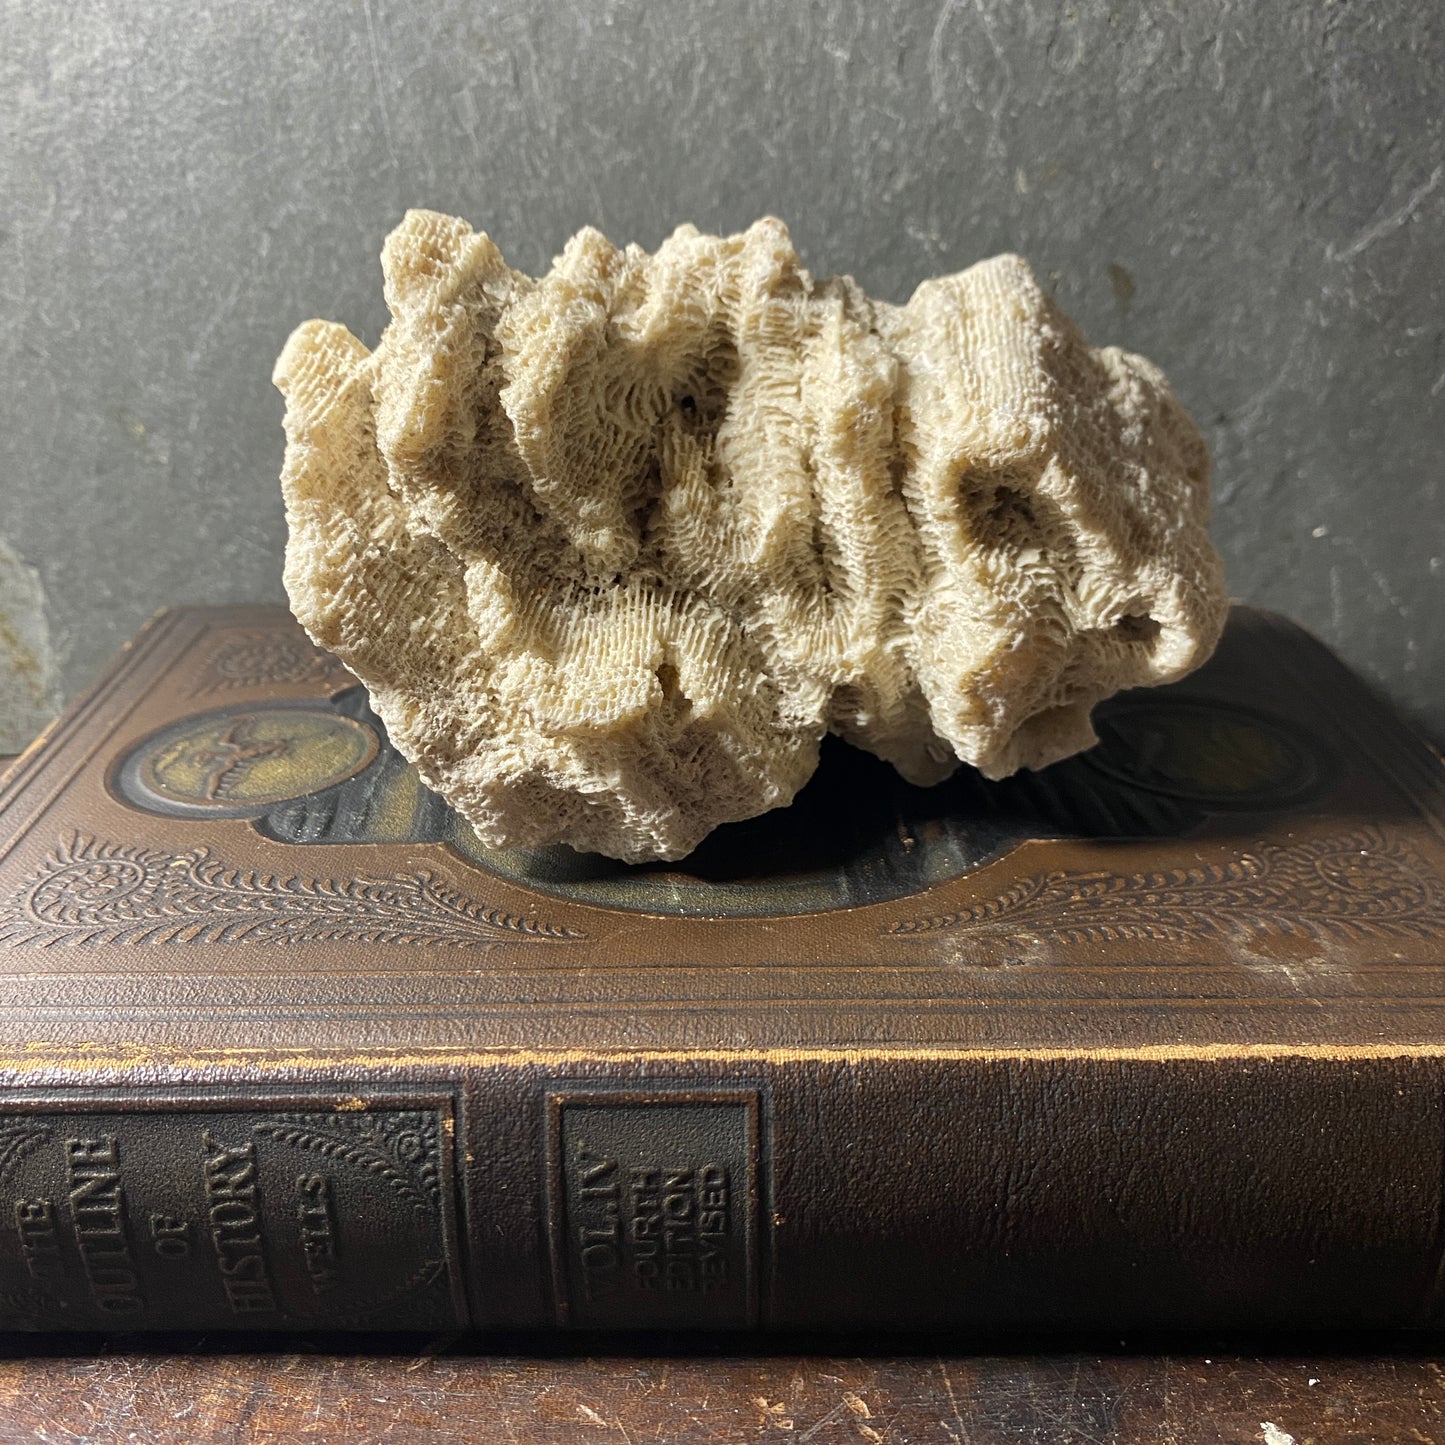 Vintage Coral Specimens, Natural History Curiosity Decorative Objects